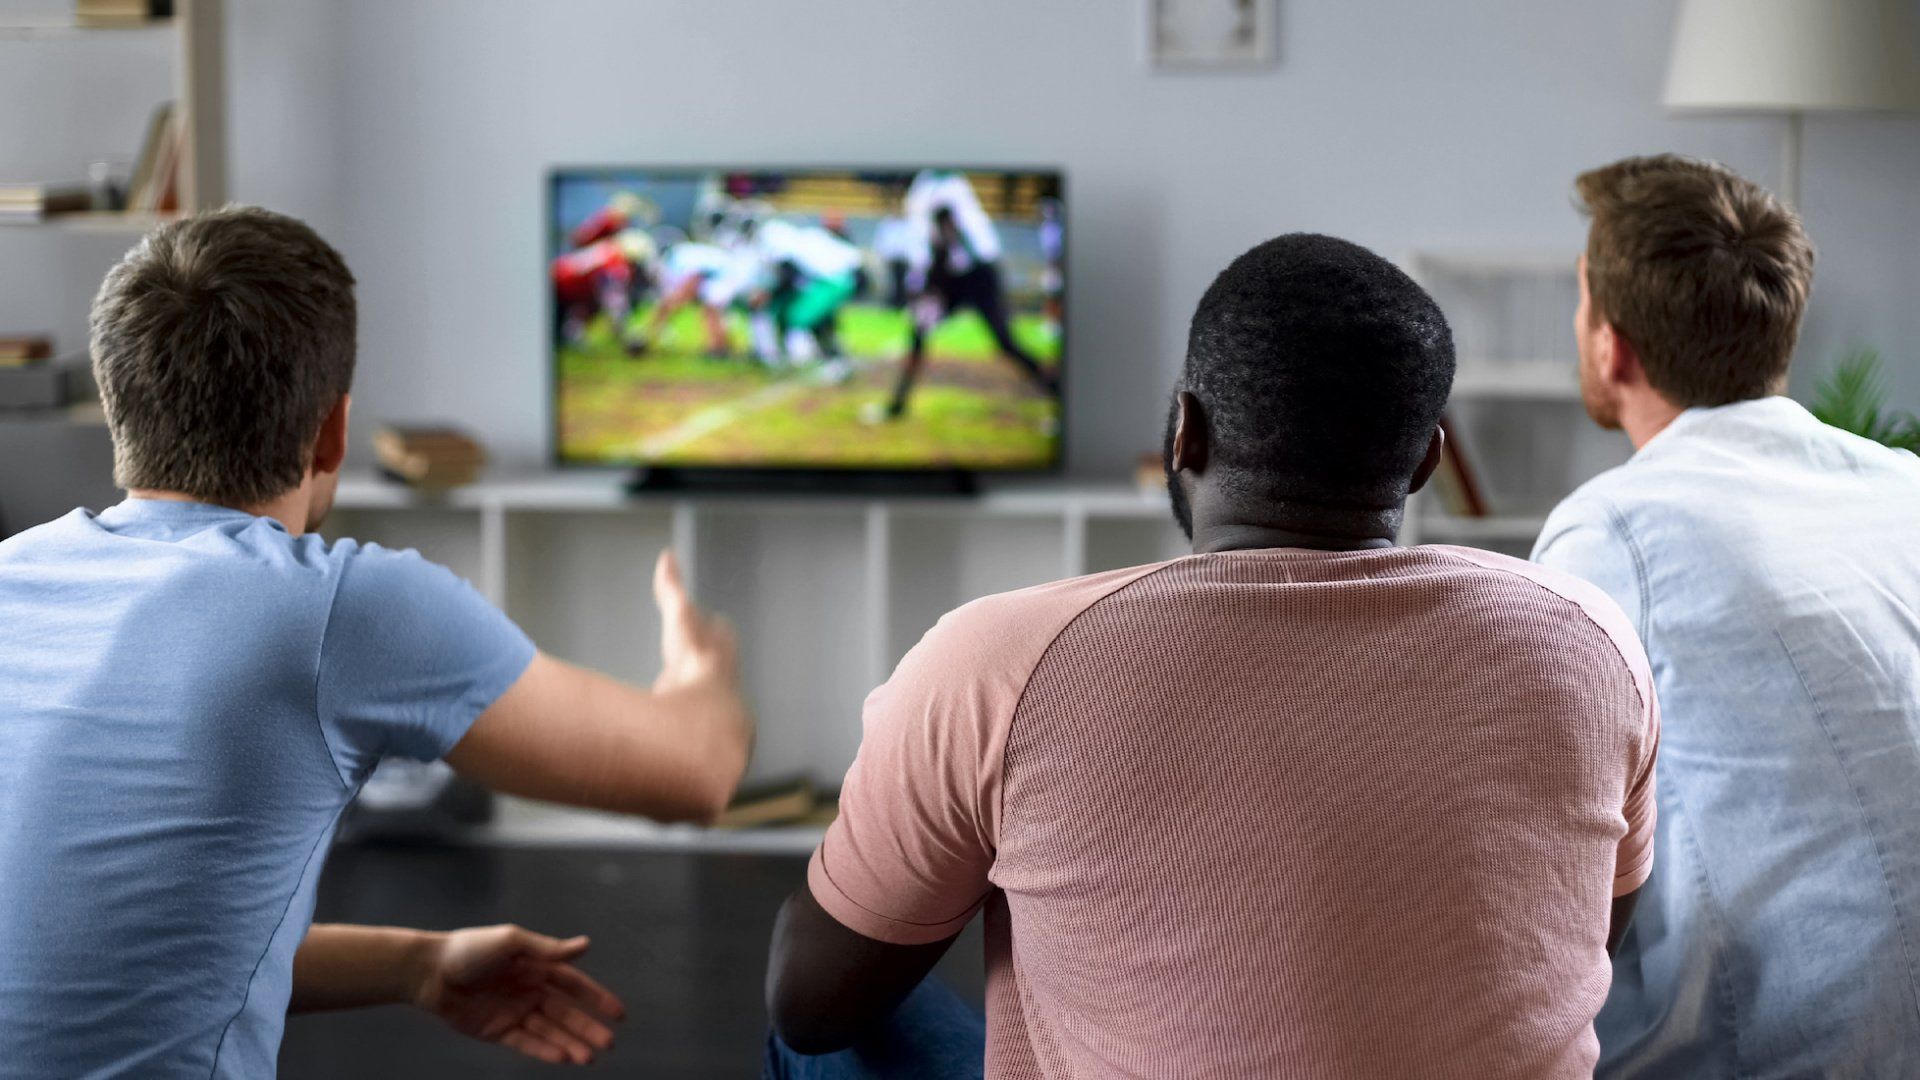 Three men are sitting on a couch watching a football game on a television.